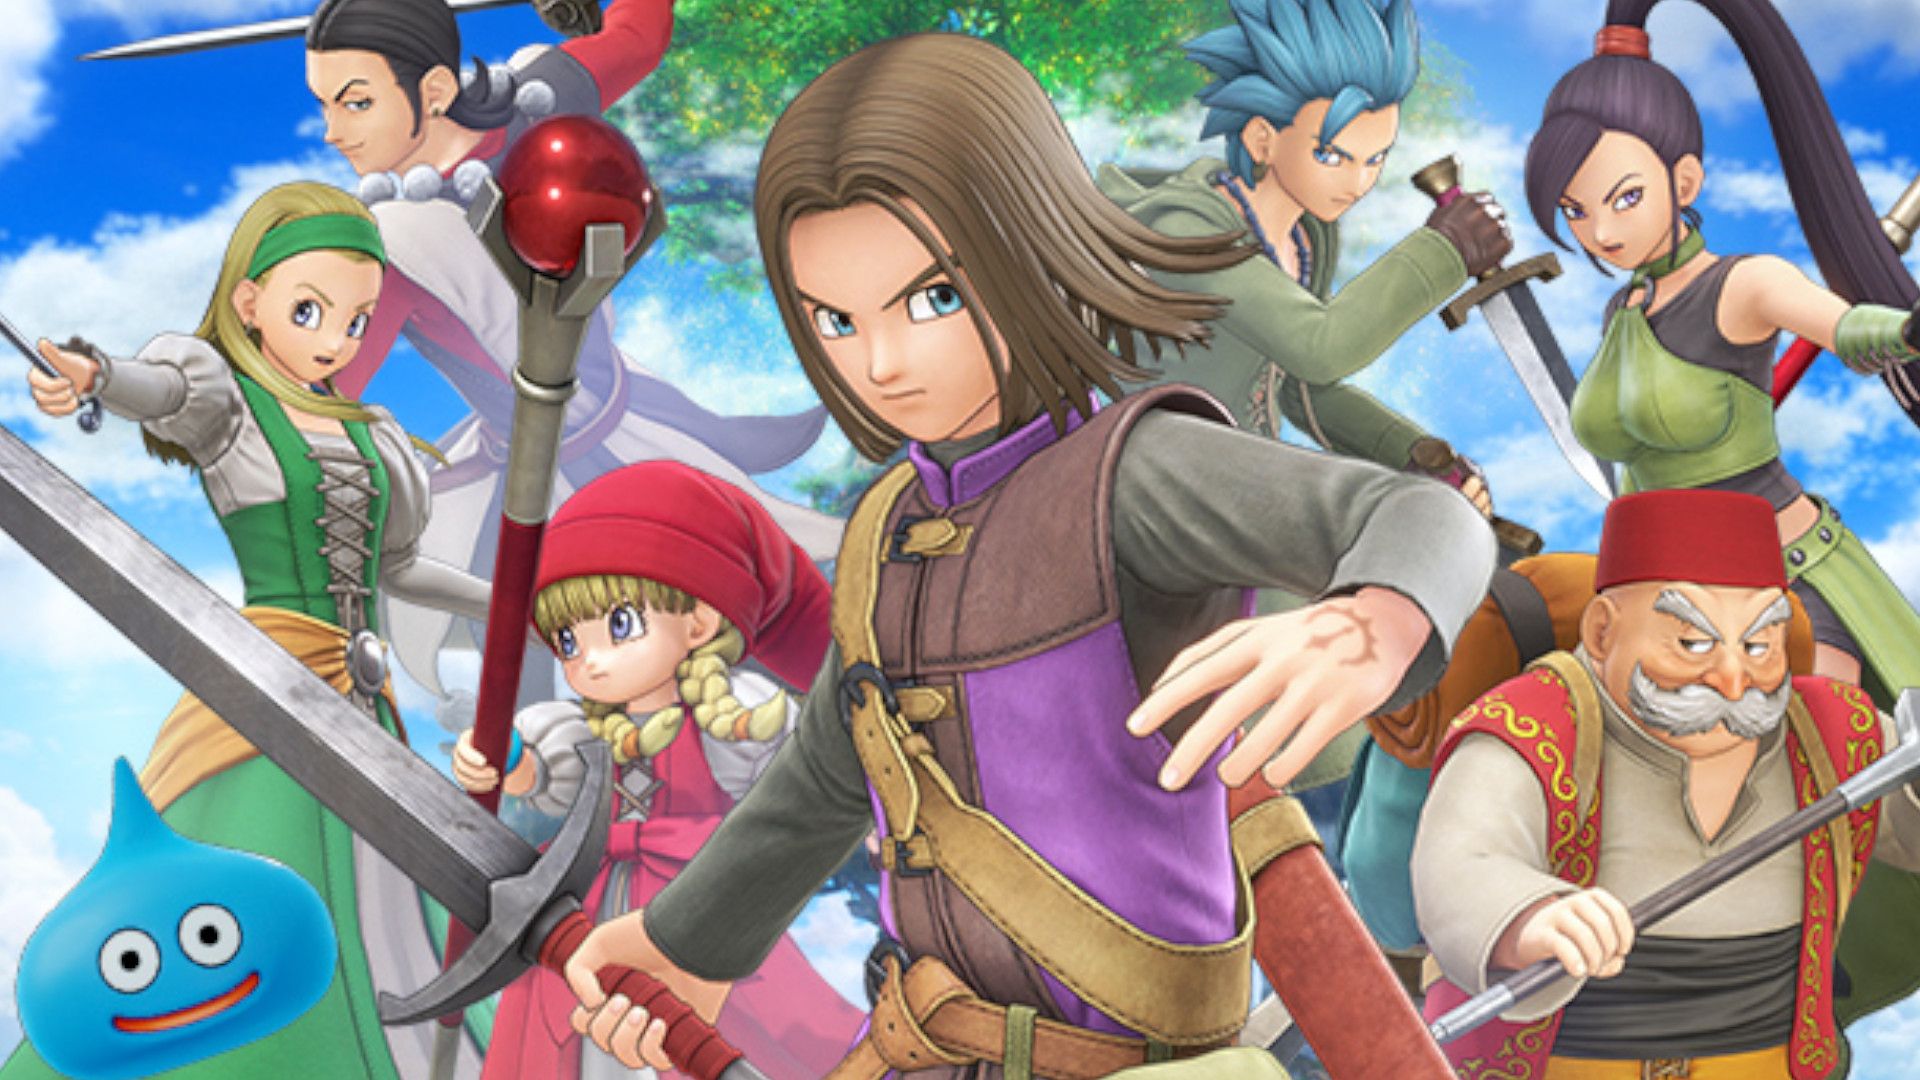 You can now play 10 hours of Dragon Quest 11 for free on Steam